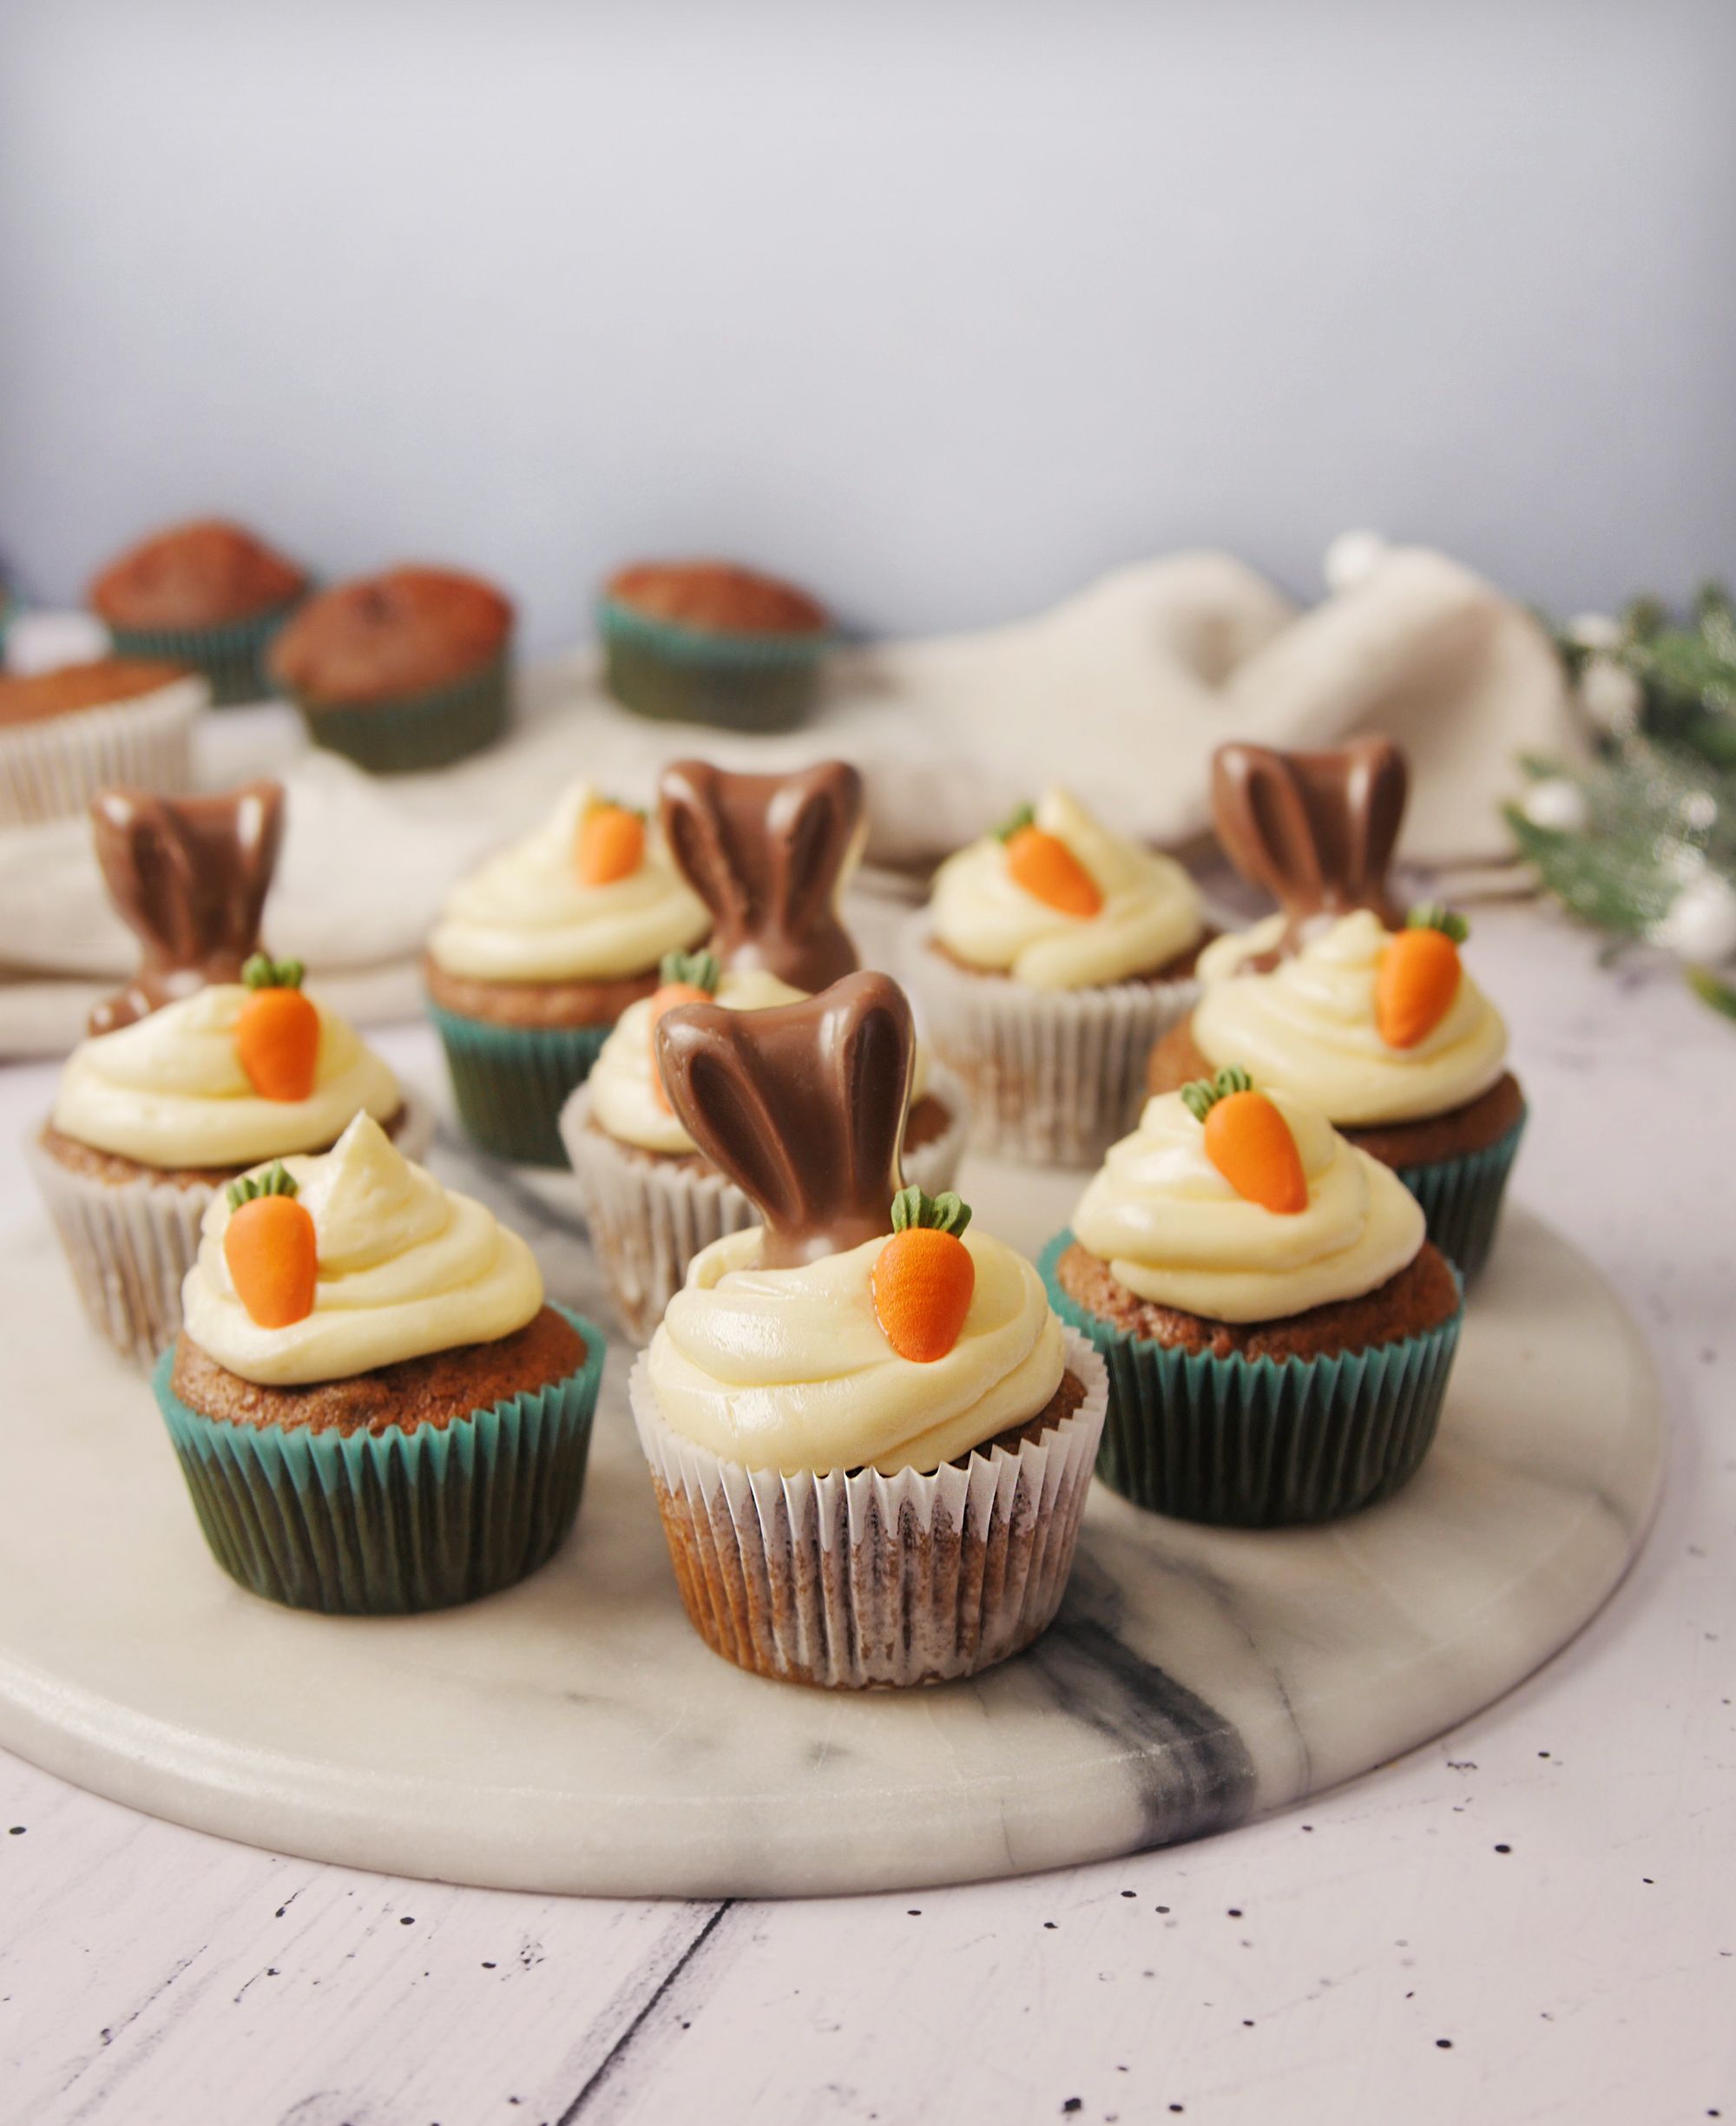 Carrot Cake Cupcakes with Buttermilk-Cream Cheese Frosting